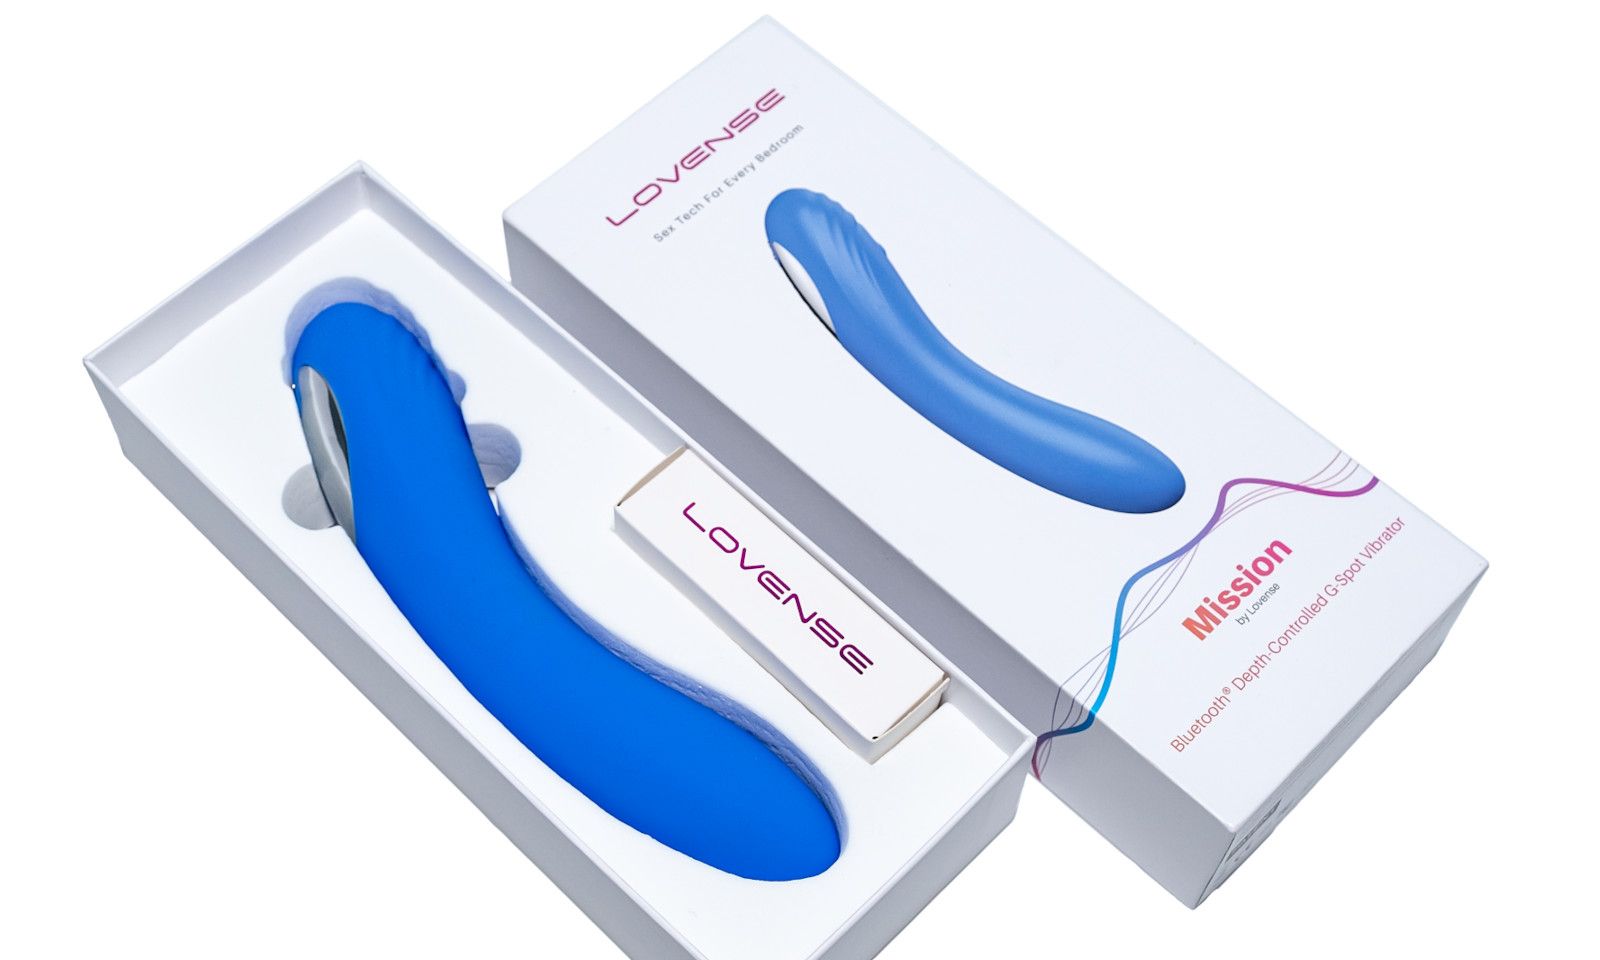 Lovense Debuts Mission, a New G-Spot Depth-Controlled Vibrator